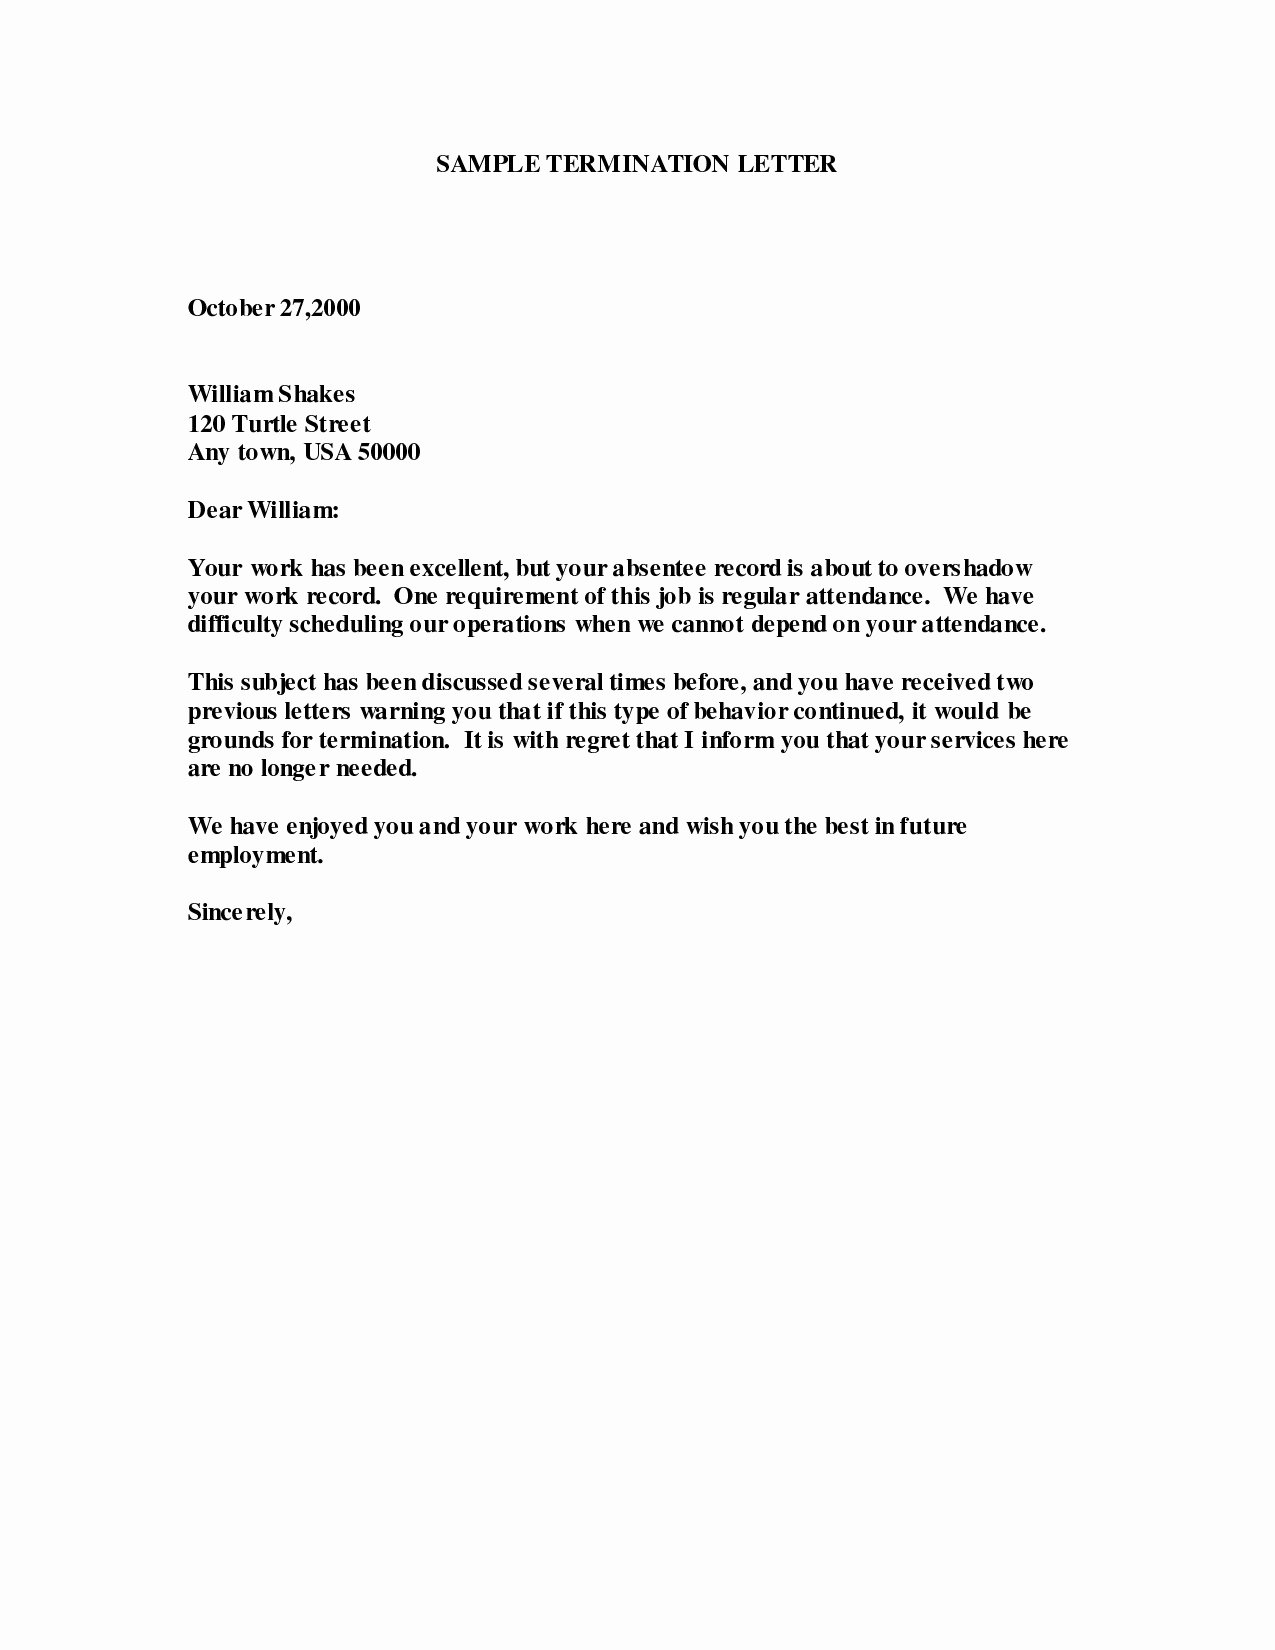 Termination for Cause Letter Inspirational Sample Termination Letter for Cause